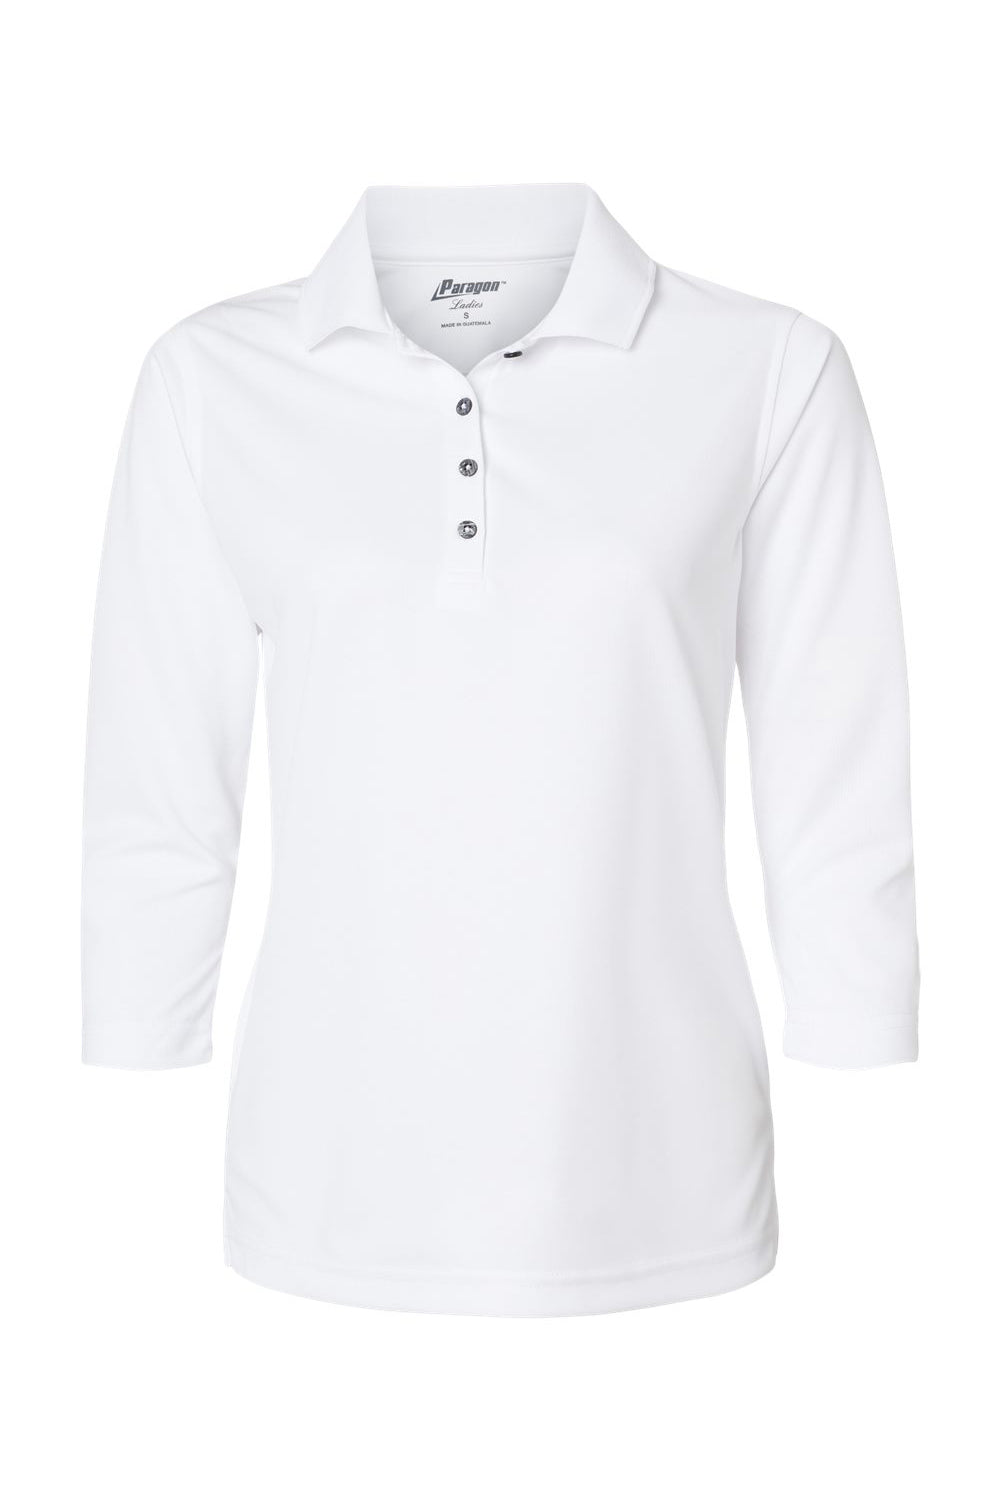 Paragon 120 Womens Lady Palm 3/4 Sleeve Polo Shirt White Flat Front